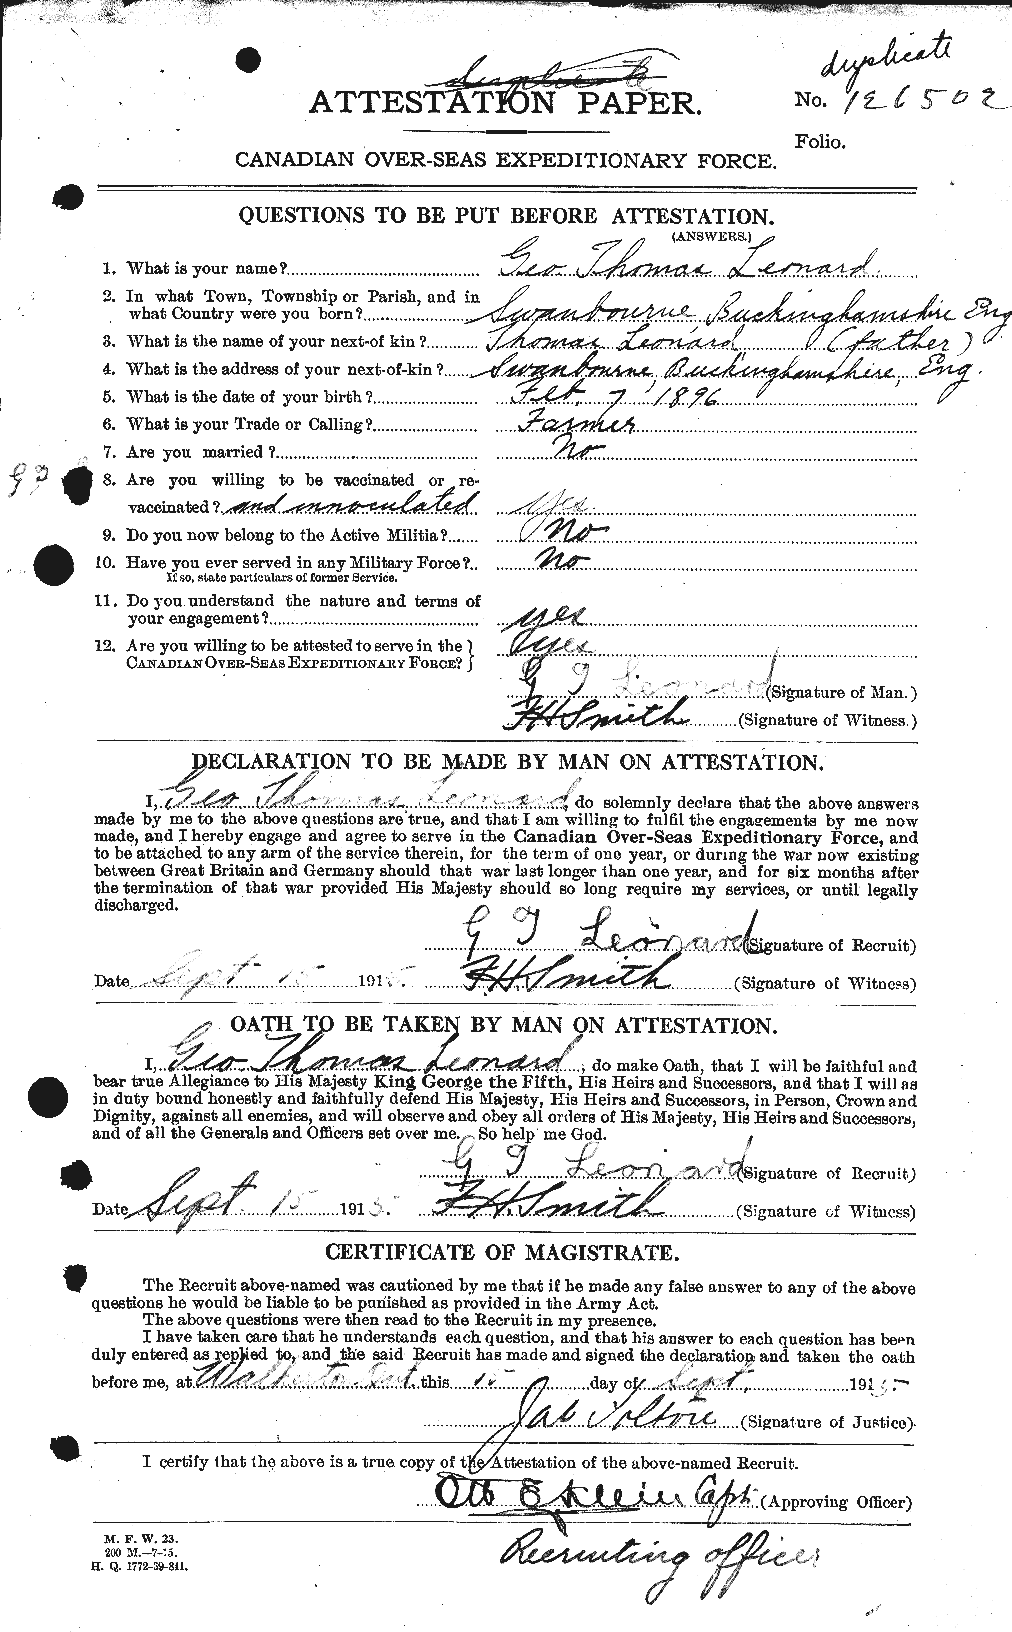 Personnel Records of the First World War - CEF 460763a